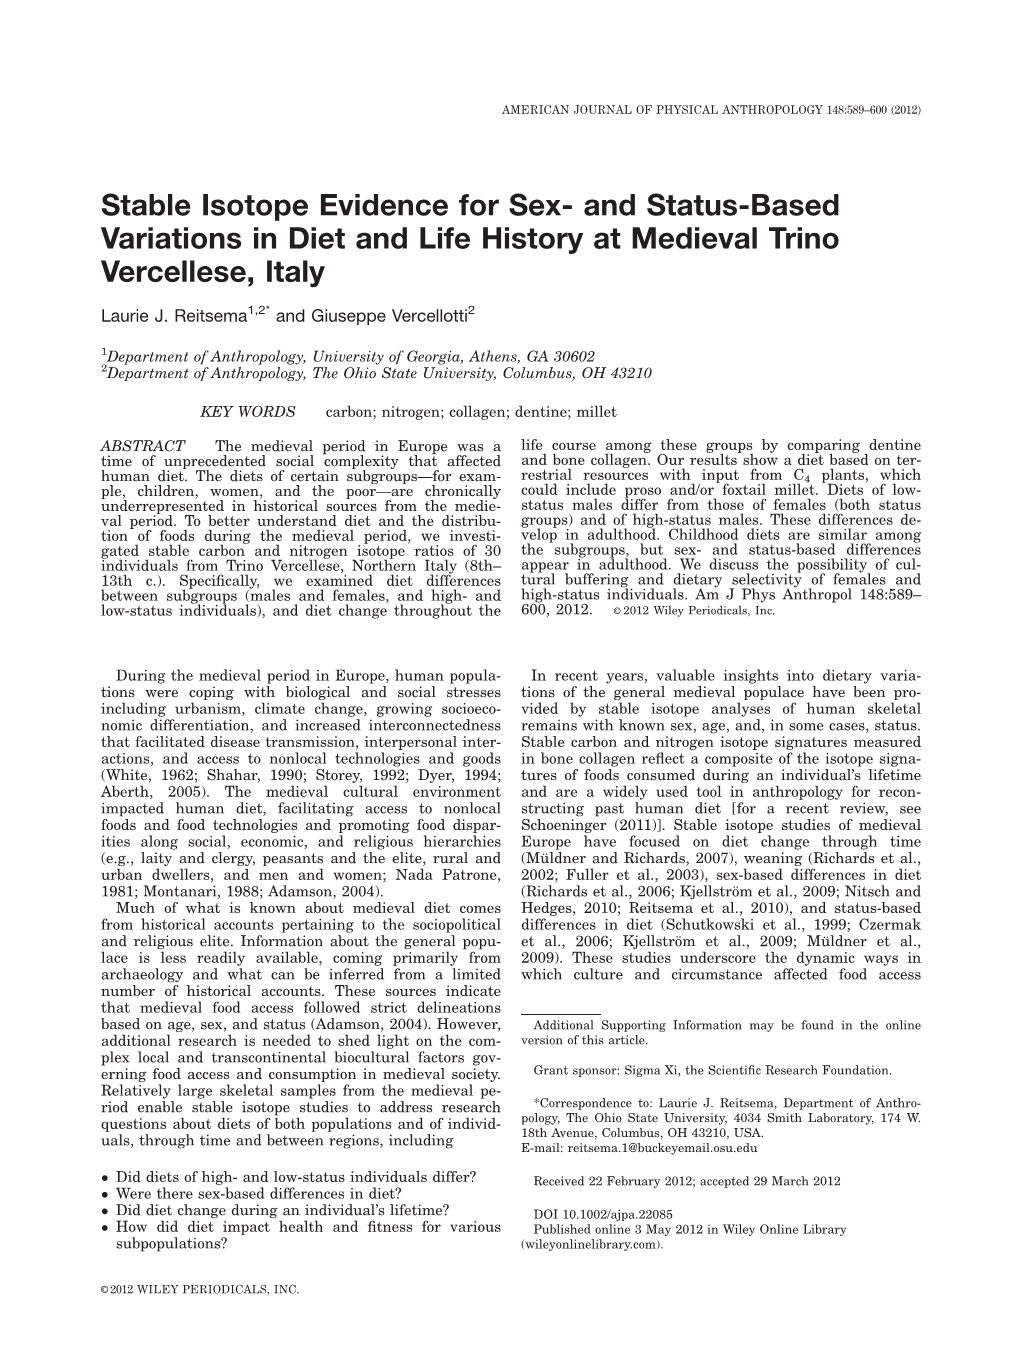 Stable Isotope Evidence for Sex- and Status-Based Variations in Diet and Life History at Medieval Trino Vercellese, Italy Laurie J